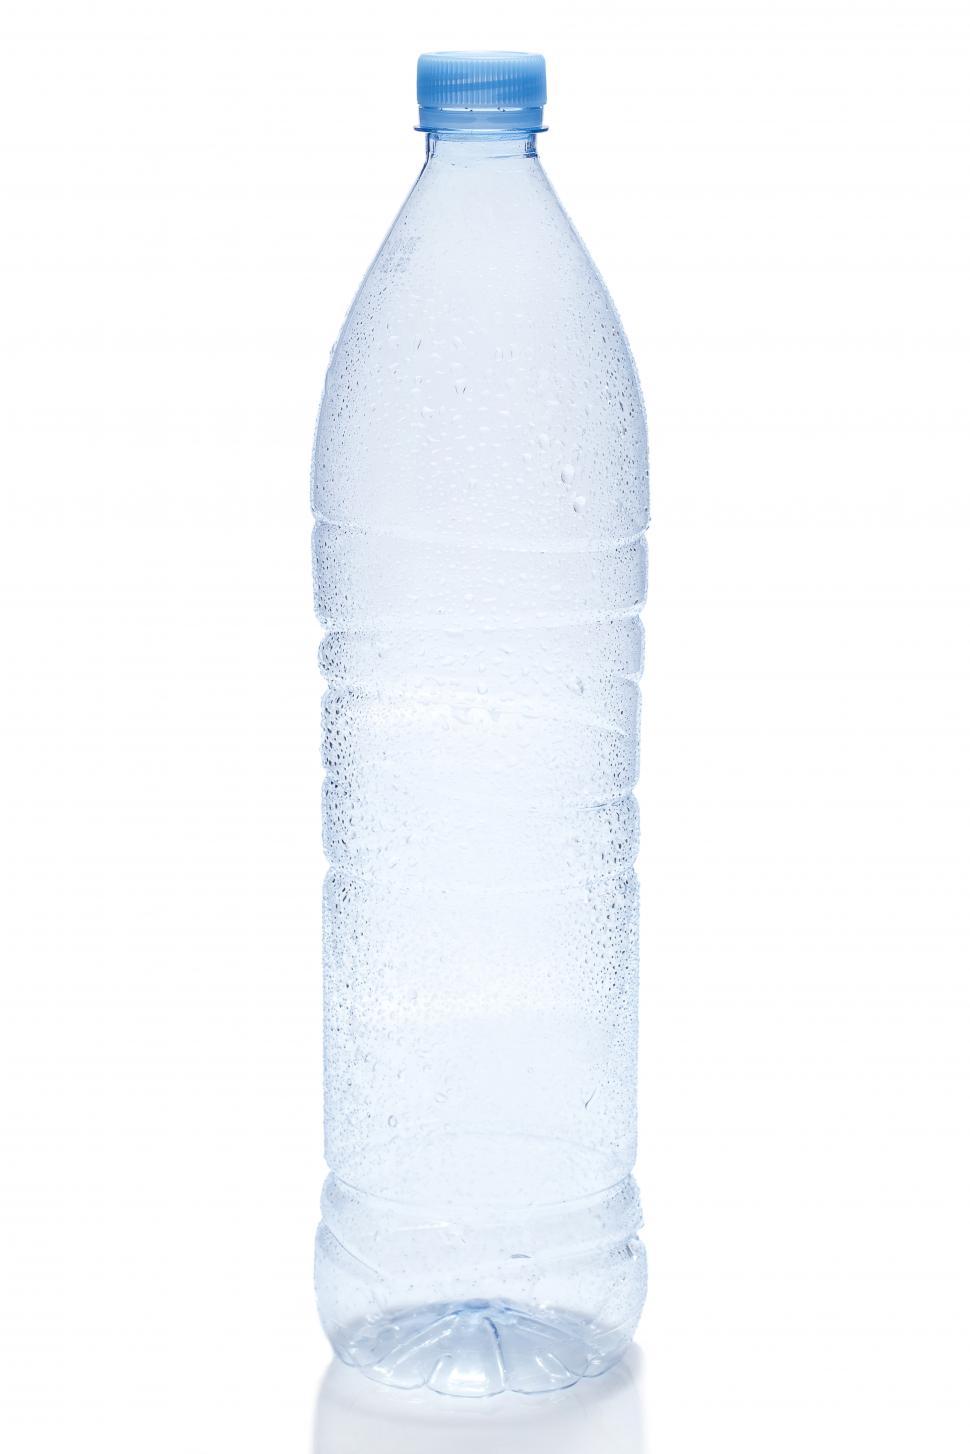 Free Image of One empty plastic water bottle 